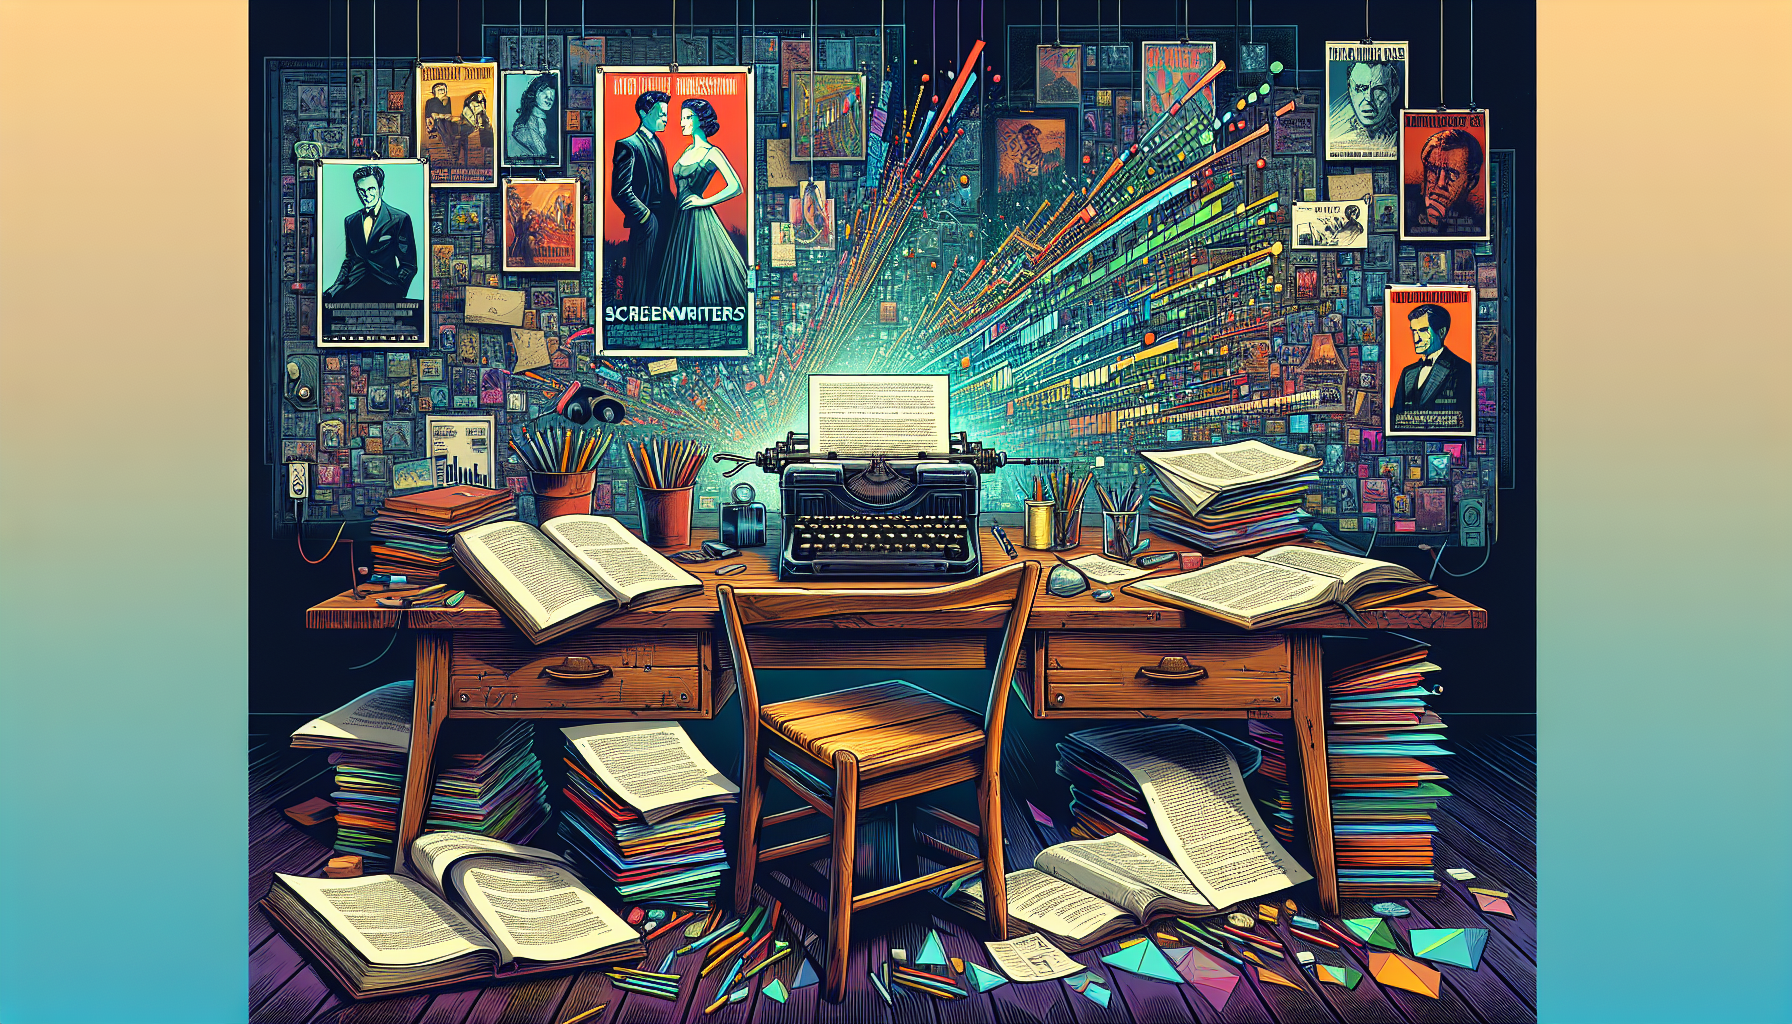 An artist's studio with scattered scripts on a wooden desk, a vintage typewriter, and a wall filled with movie posters, with a digital screen displaying a graph of average salary trends for screenwrit